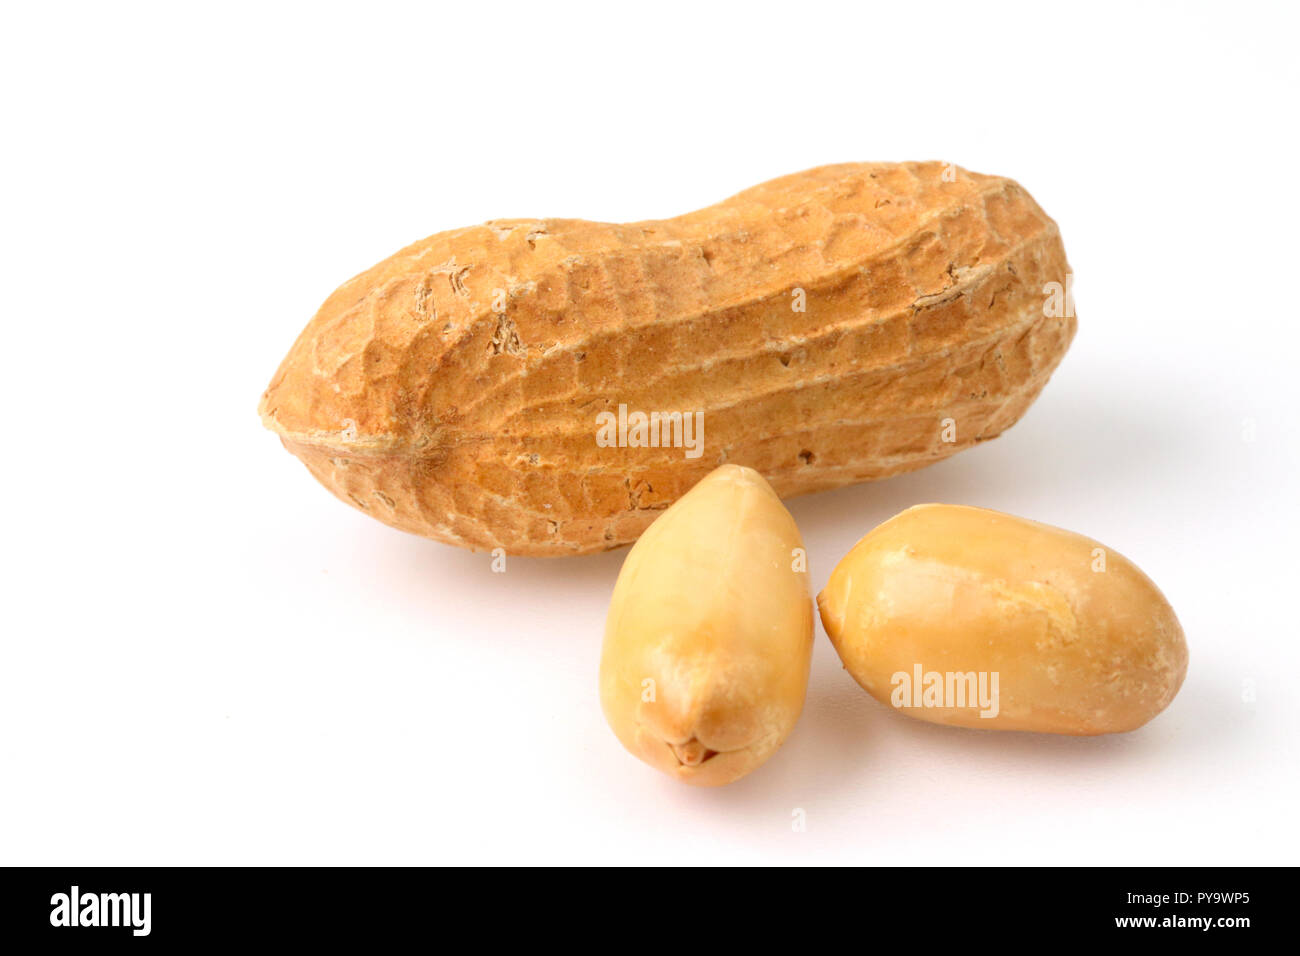 Peanut in and out of the shell Stock Photo